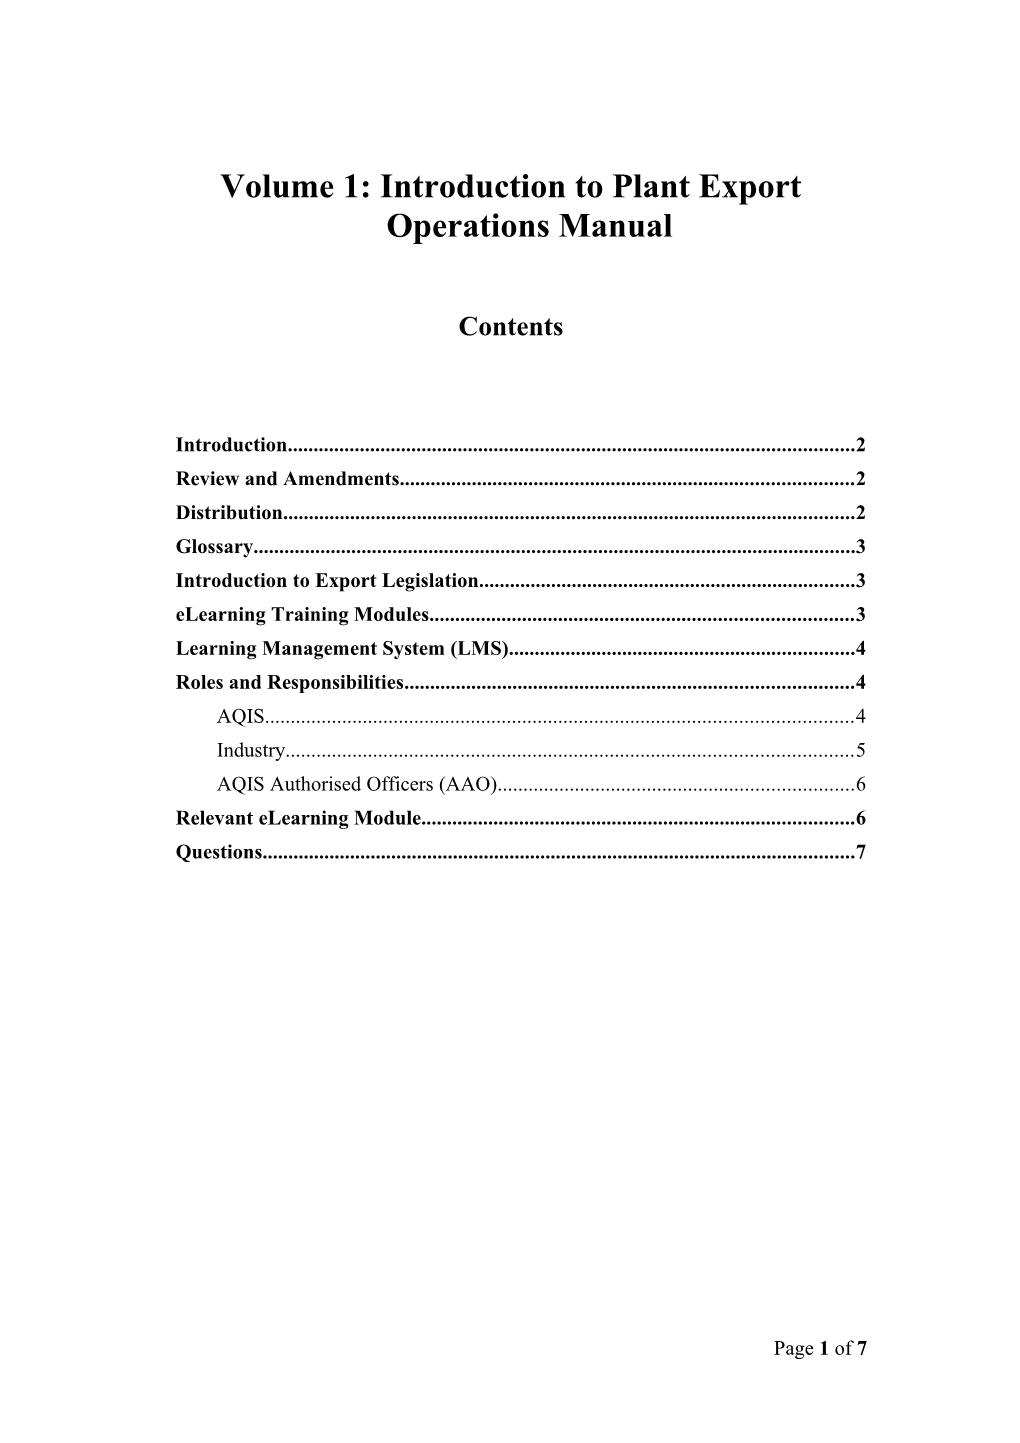 Volume 1: Introduction to Plant Export Operations Manual